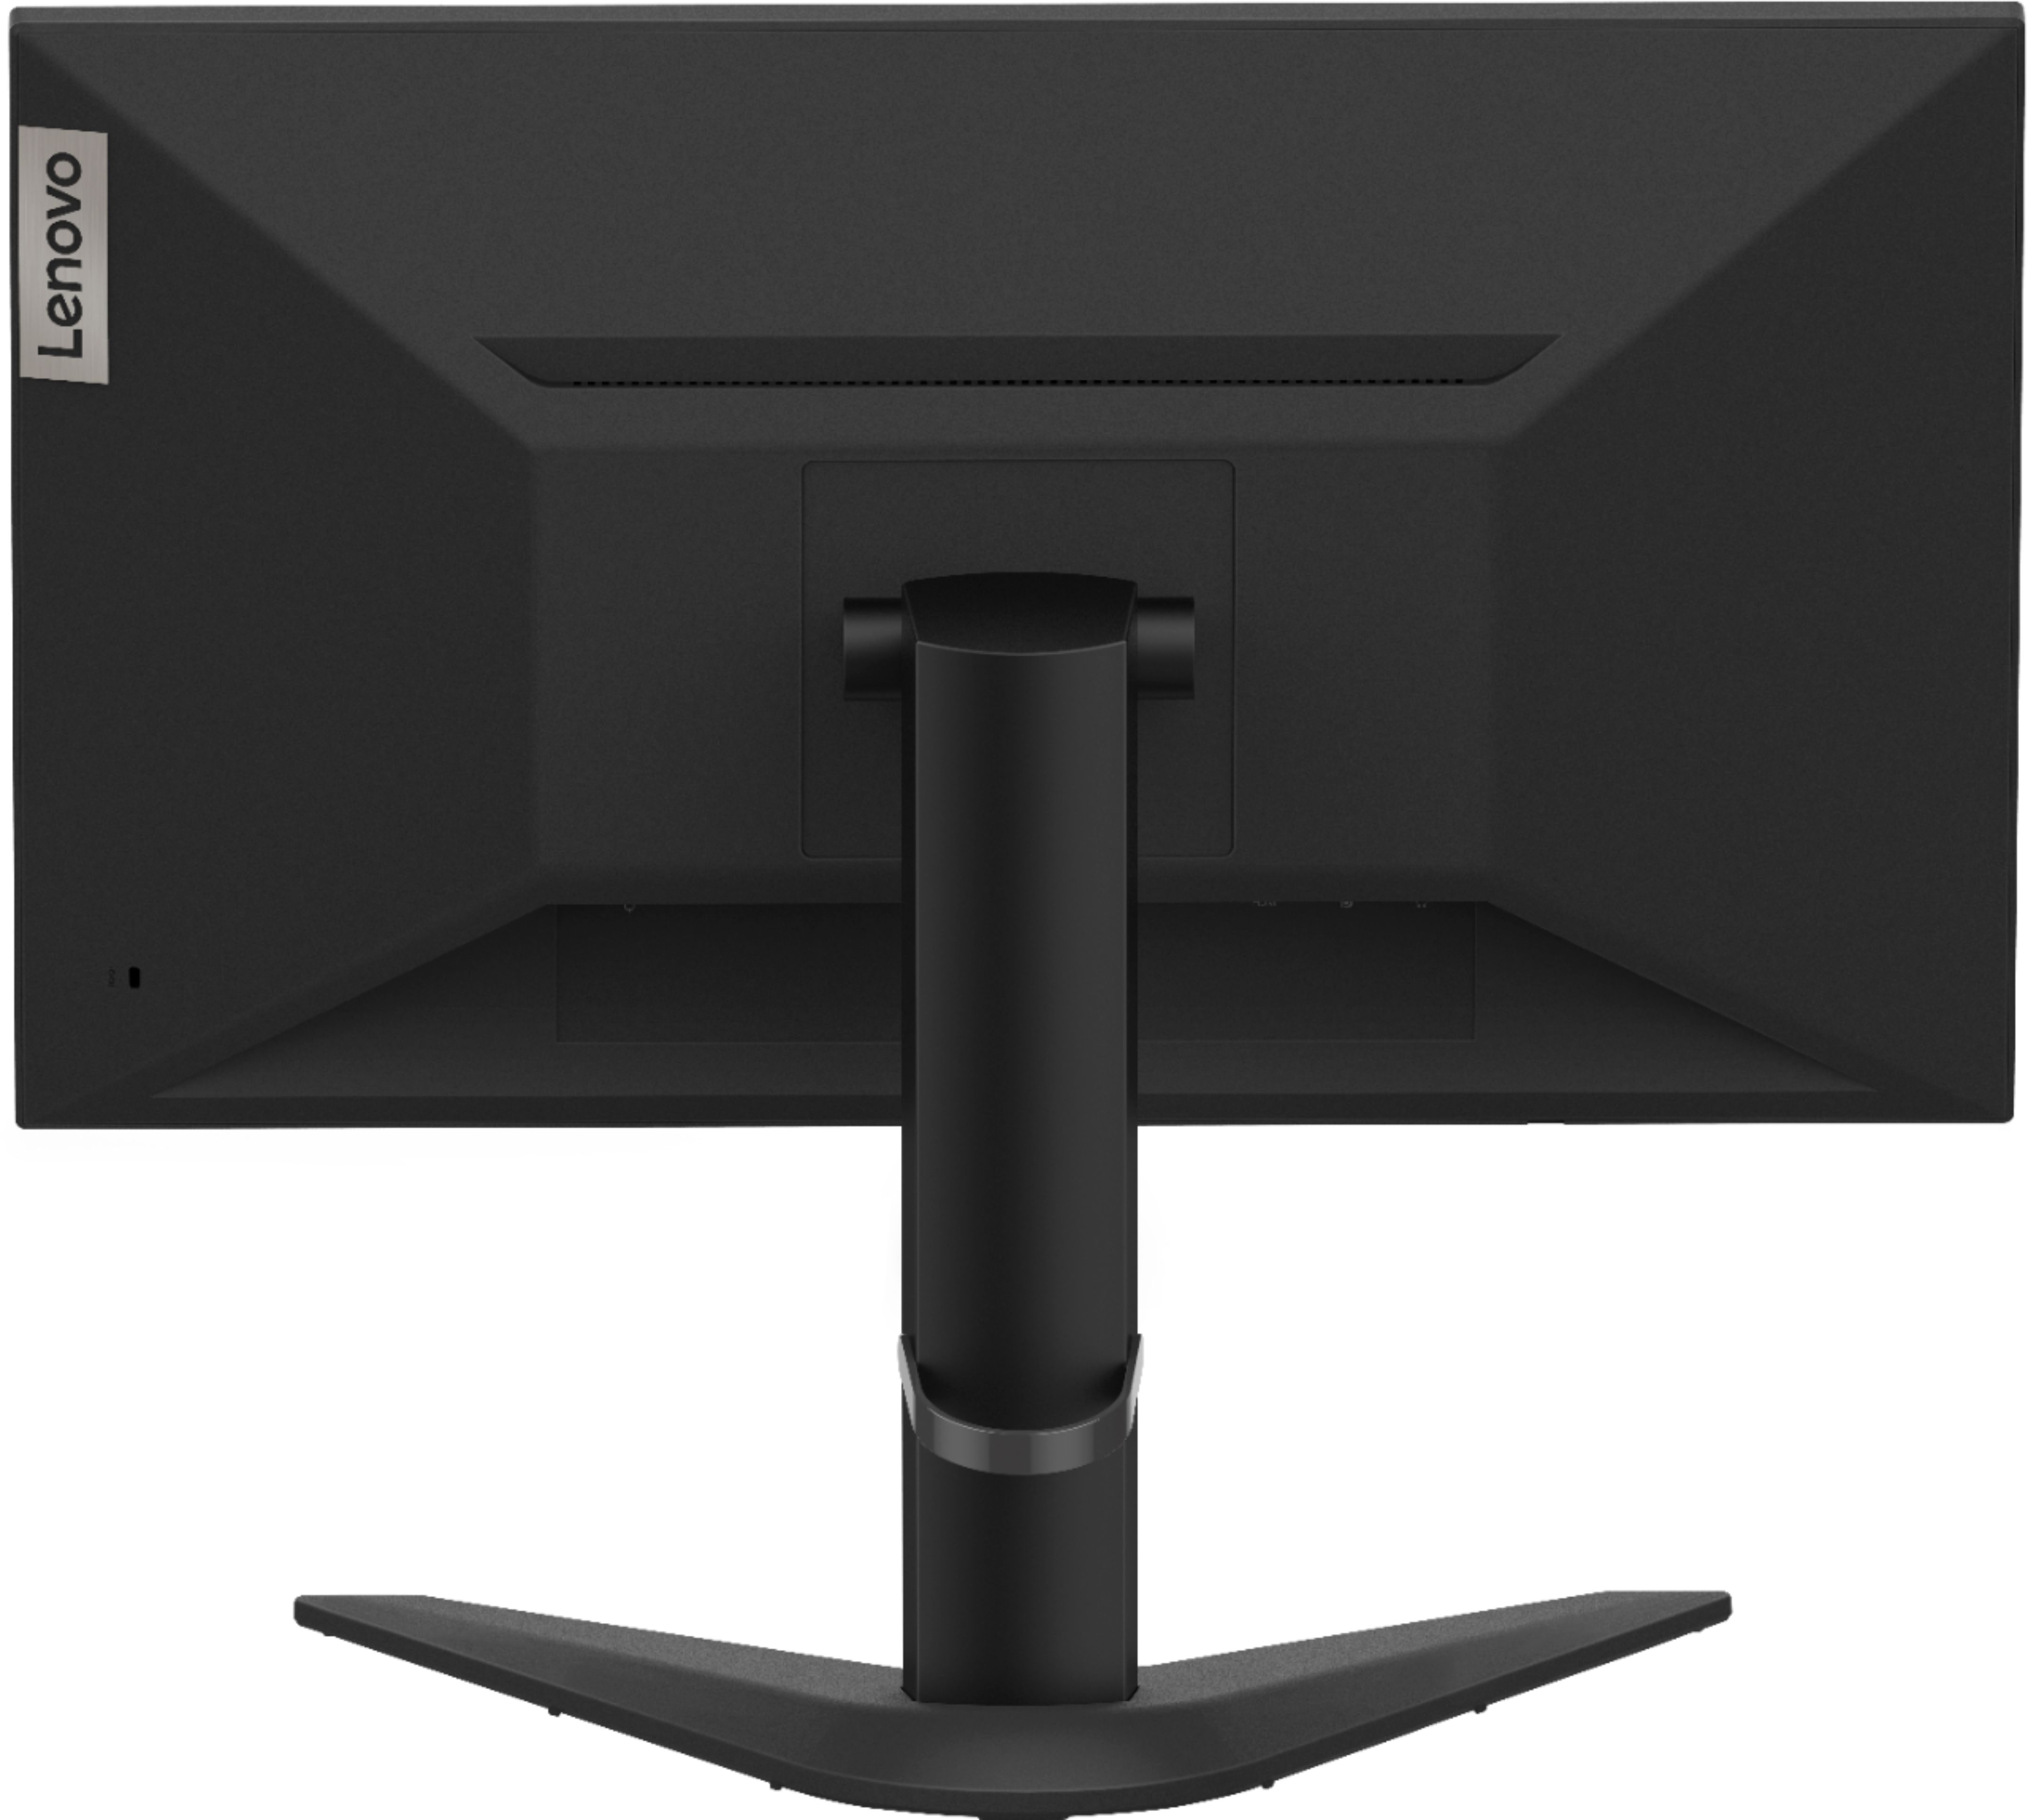 Back View: LG - UltraGear 27" IPS LED QHD FreeSync and G-SYNC Compatible Monitor with HDR 10  (DisplayPort, HDMI) - Black